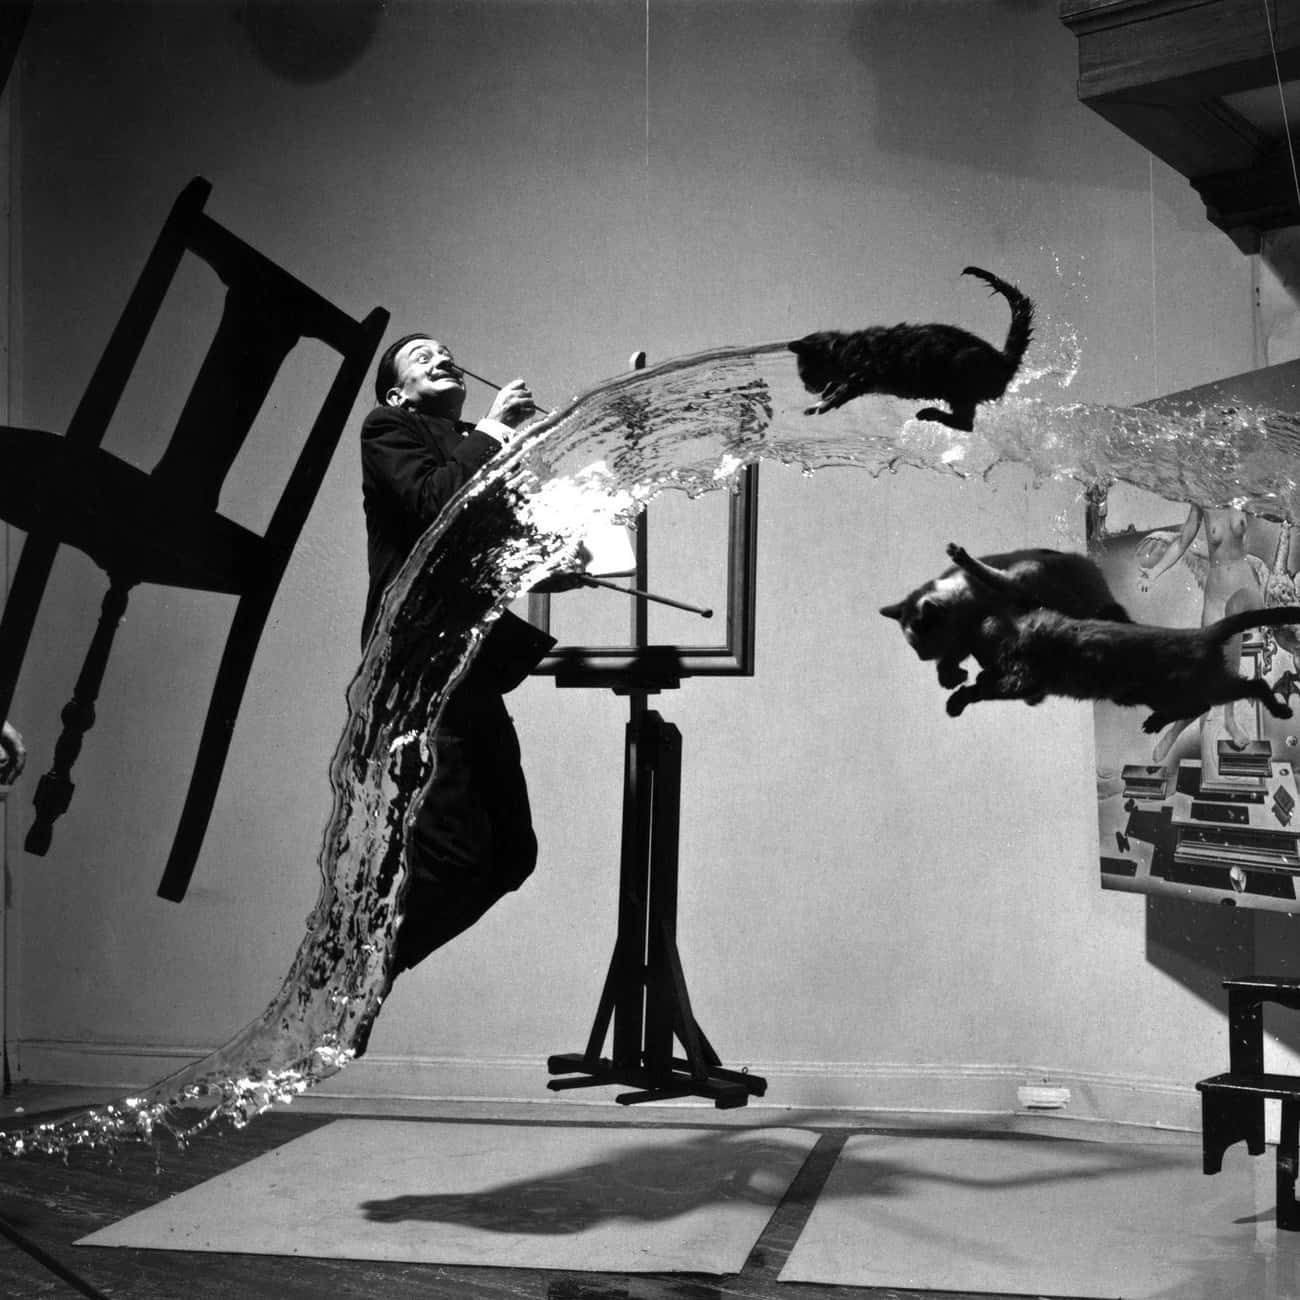 He Created One Of His Most Famous Works By Repeatedly Throwing Cats In The Air